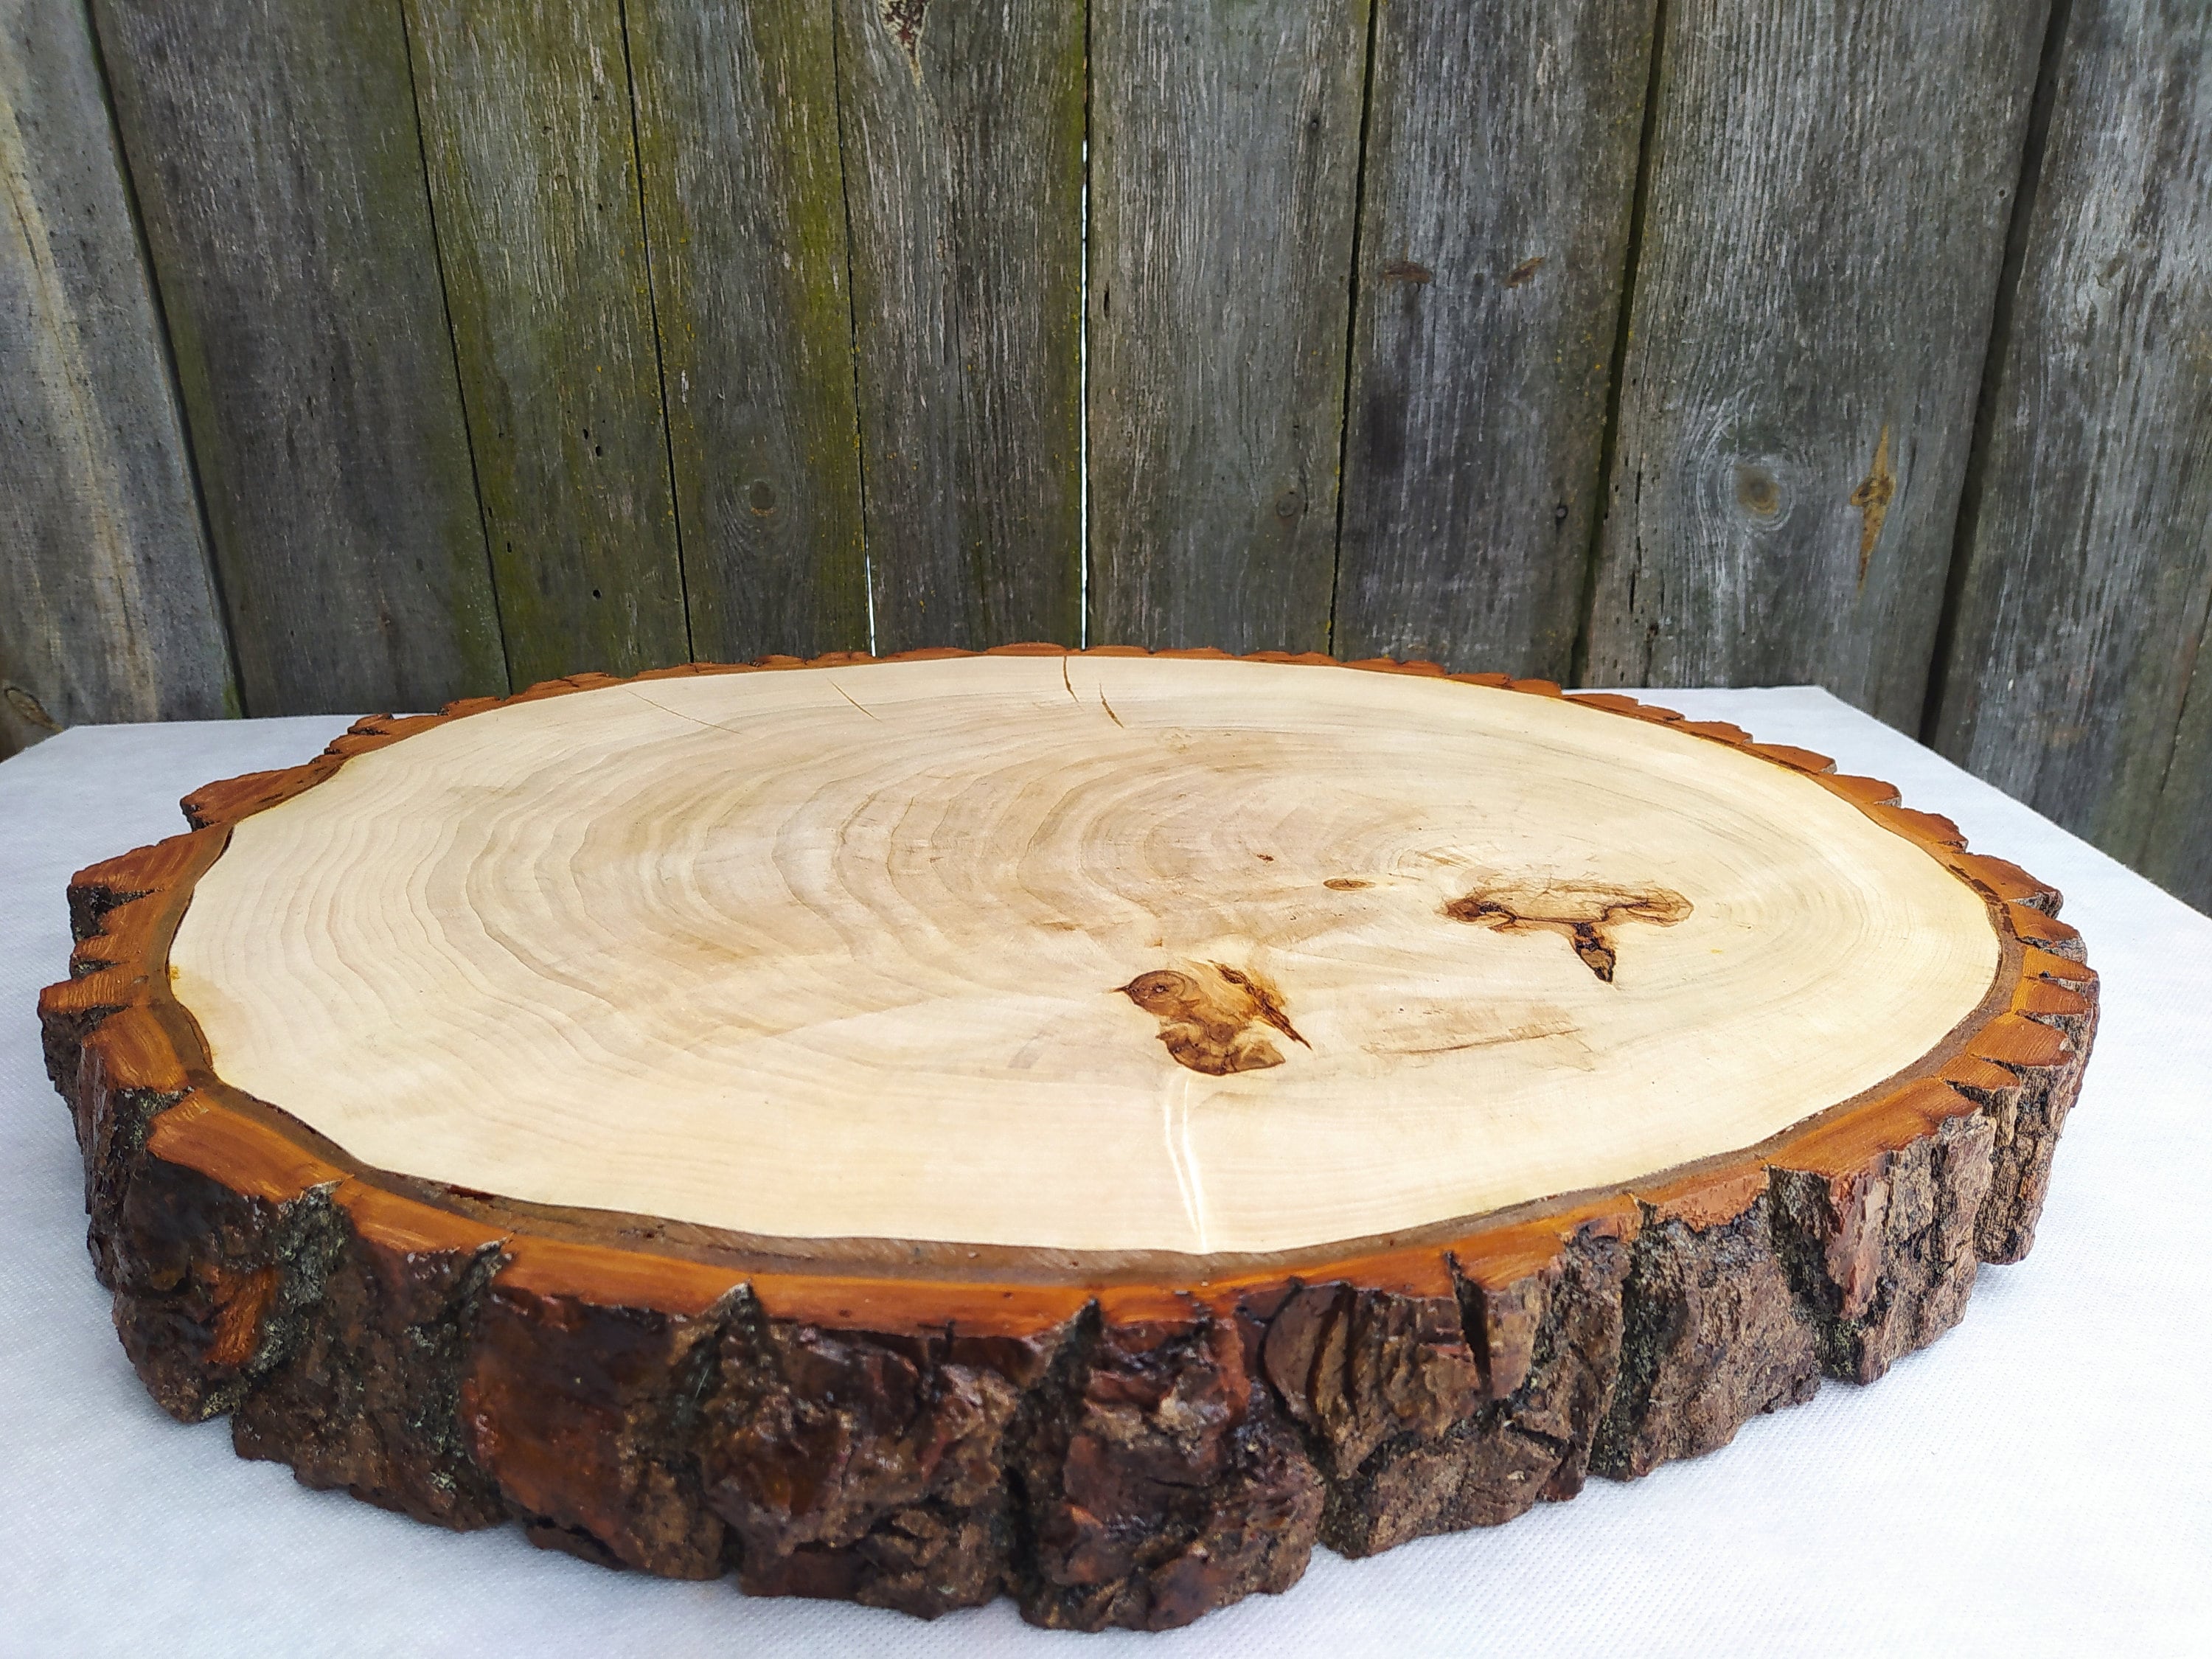 12 Inch Wood Slices -  Canada